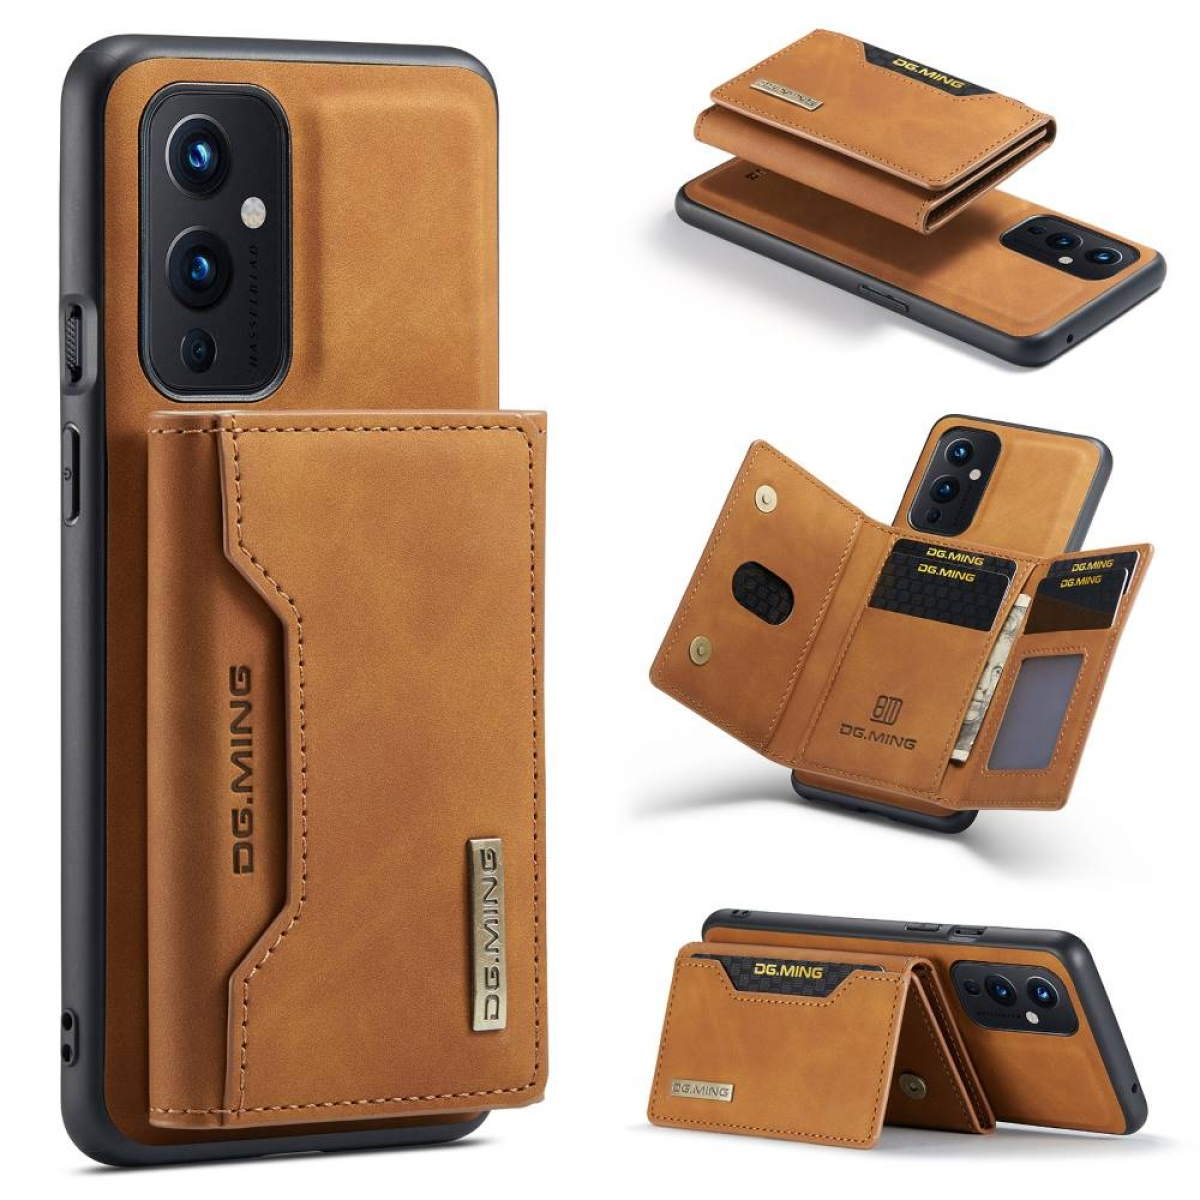 MING M2 2in1, OnePlus, Braun 9, DG Backcover,